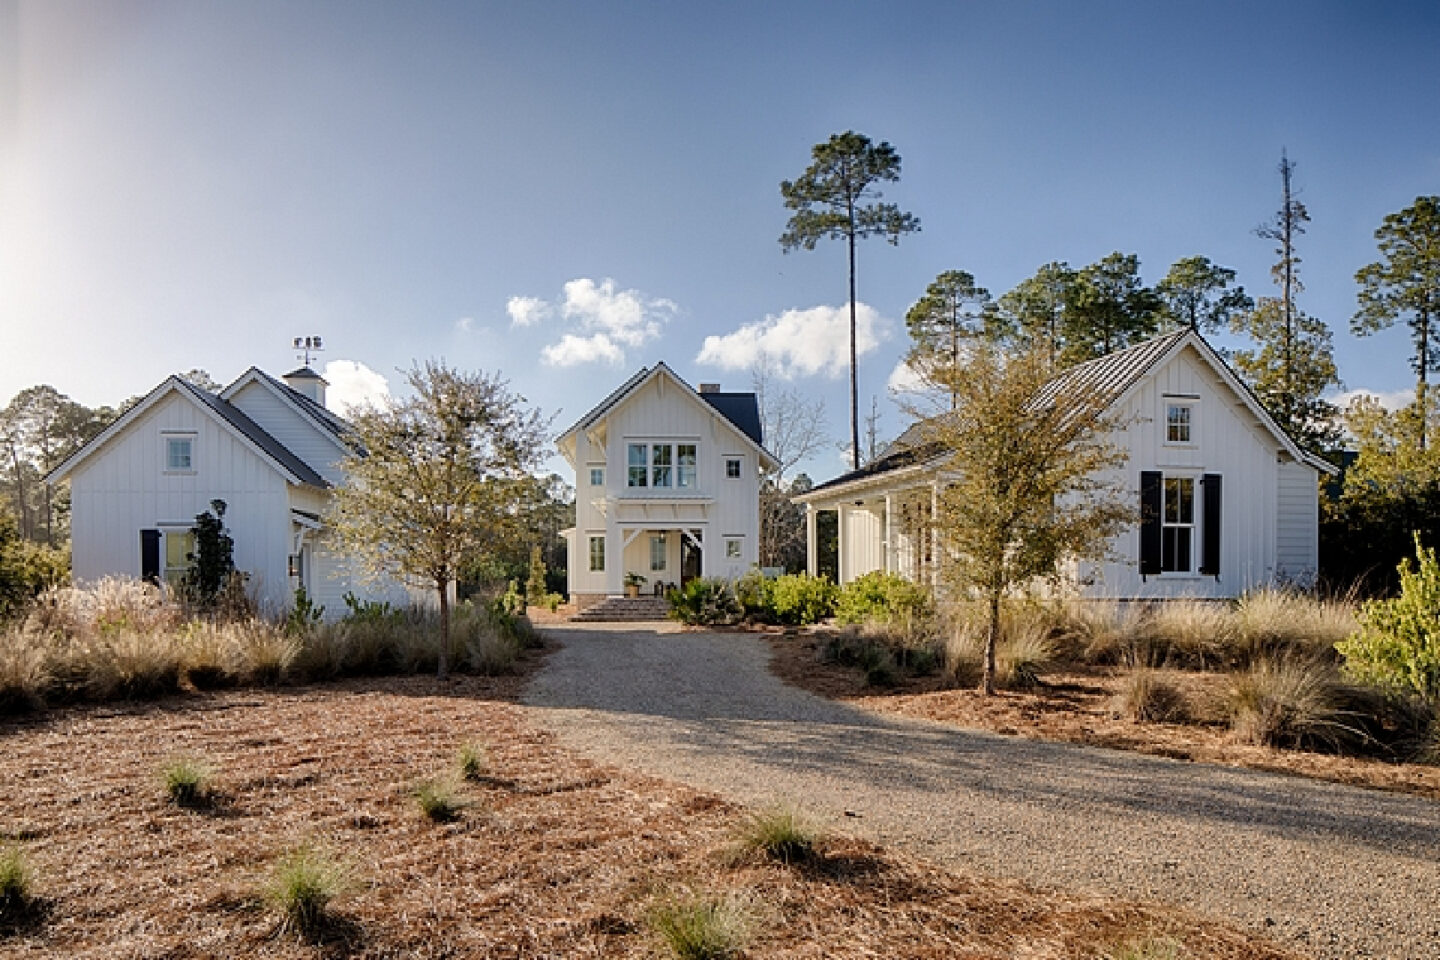 Palmetto Bluff lakeside property with three structures, board and batten and coastal interiors by Lisa Furey.